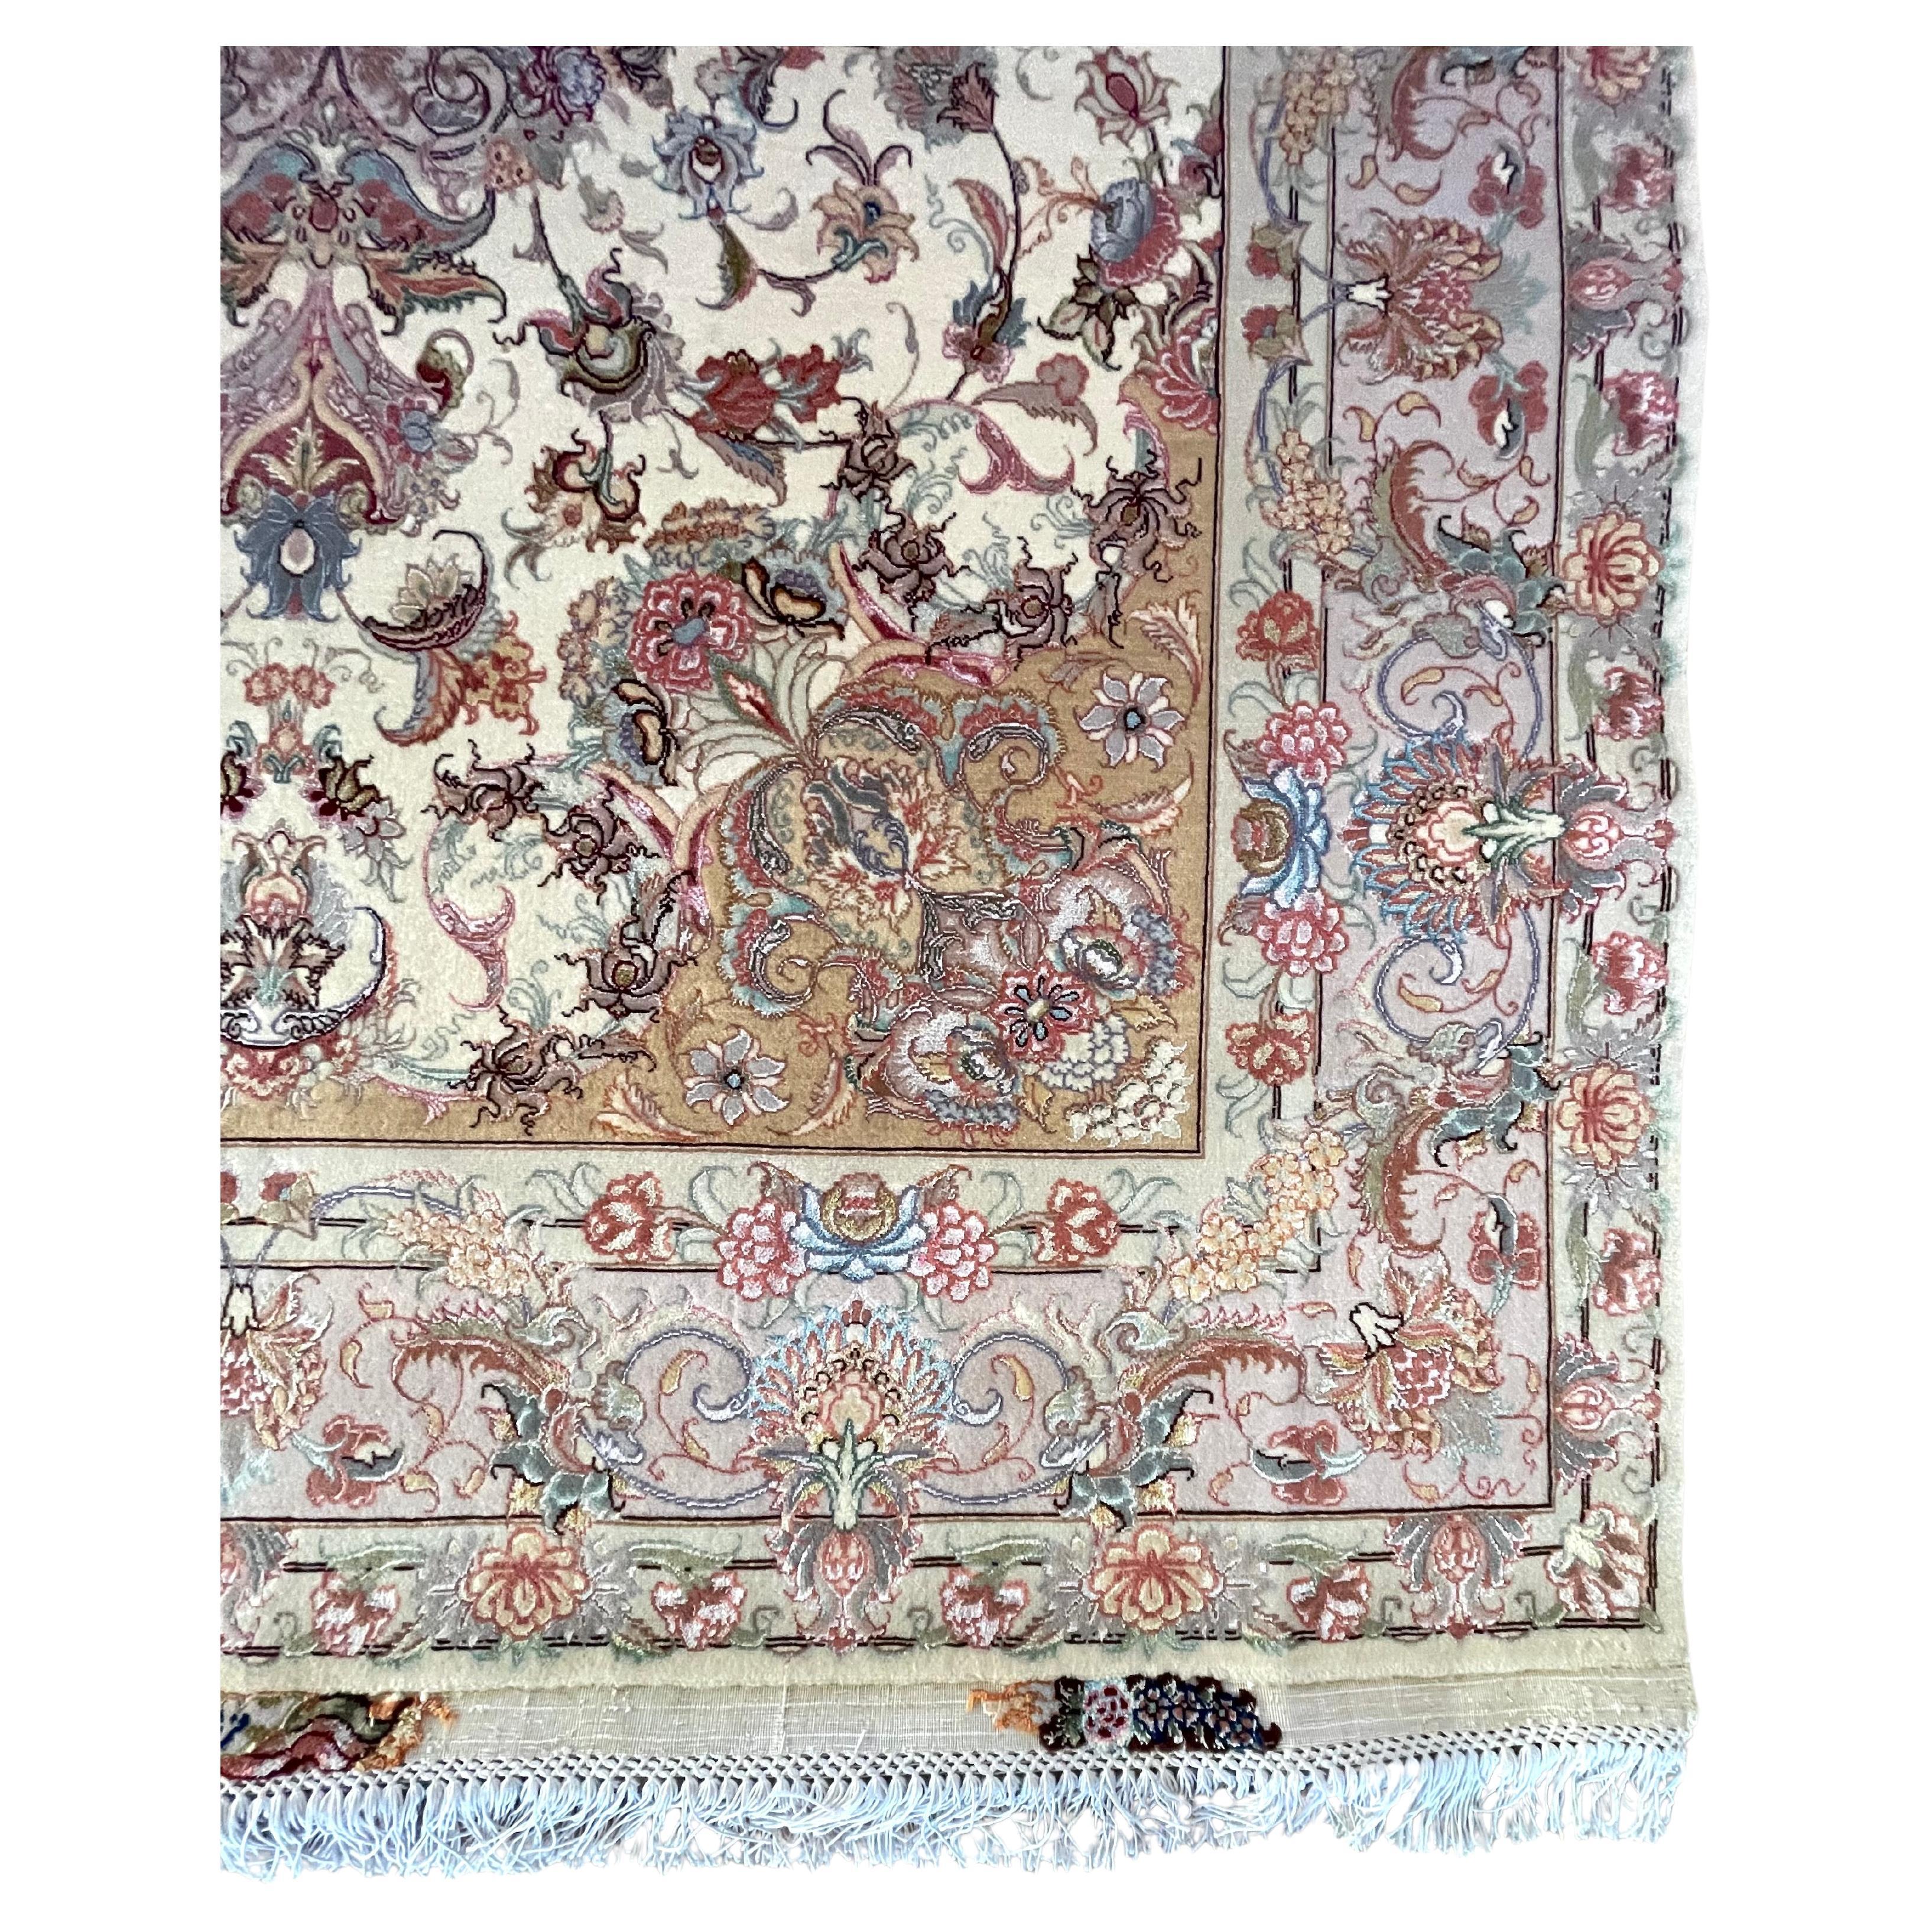 Introducing a stunning hand knotted Persian Tabriz rug that epitomizes quality craftsmanship and timeless beauty. Featuring an enchanting medallion floral design signed by Zamani, this rug captivates with its unique blend of colors and patterns and